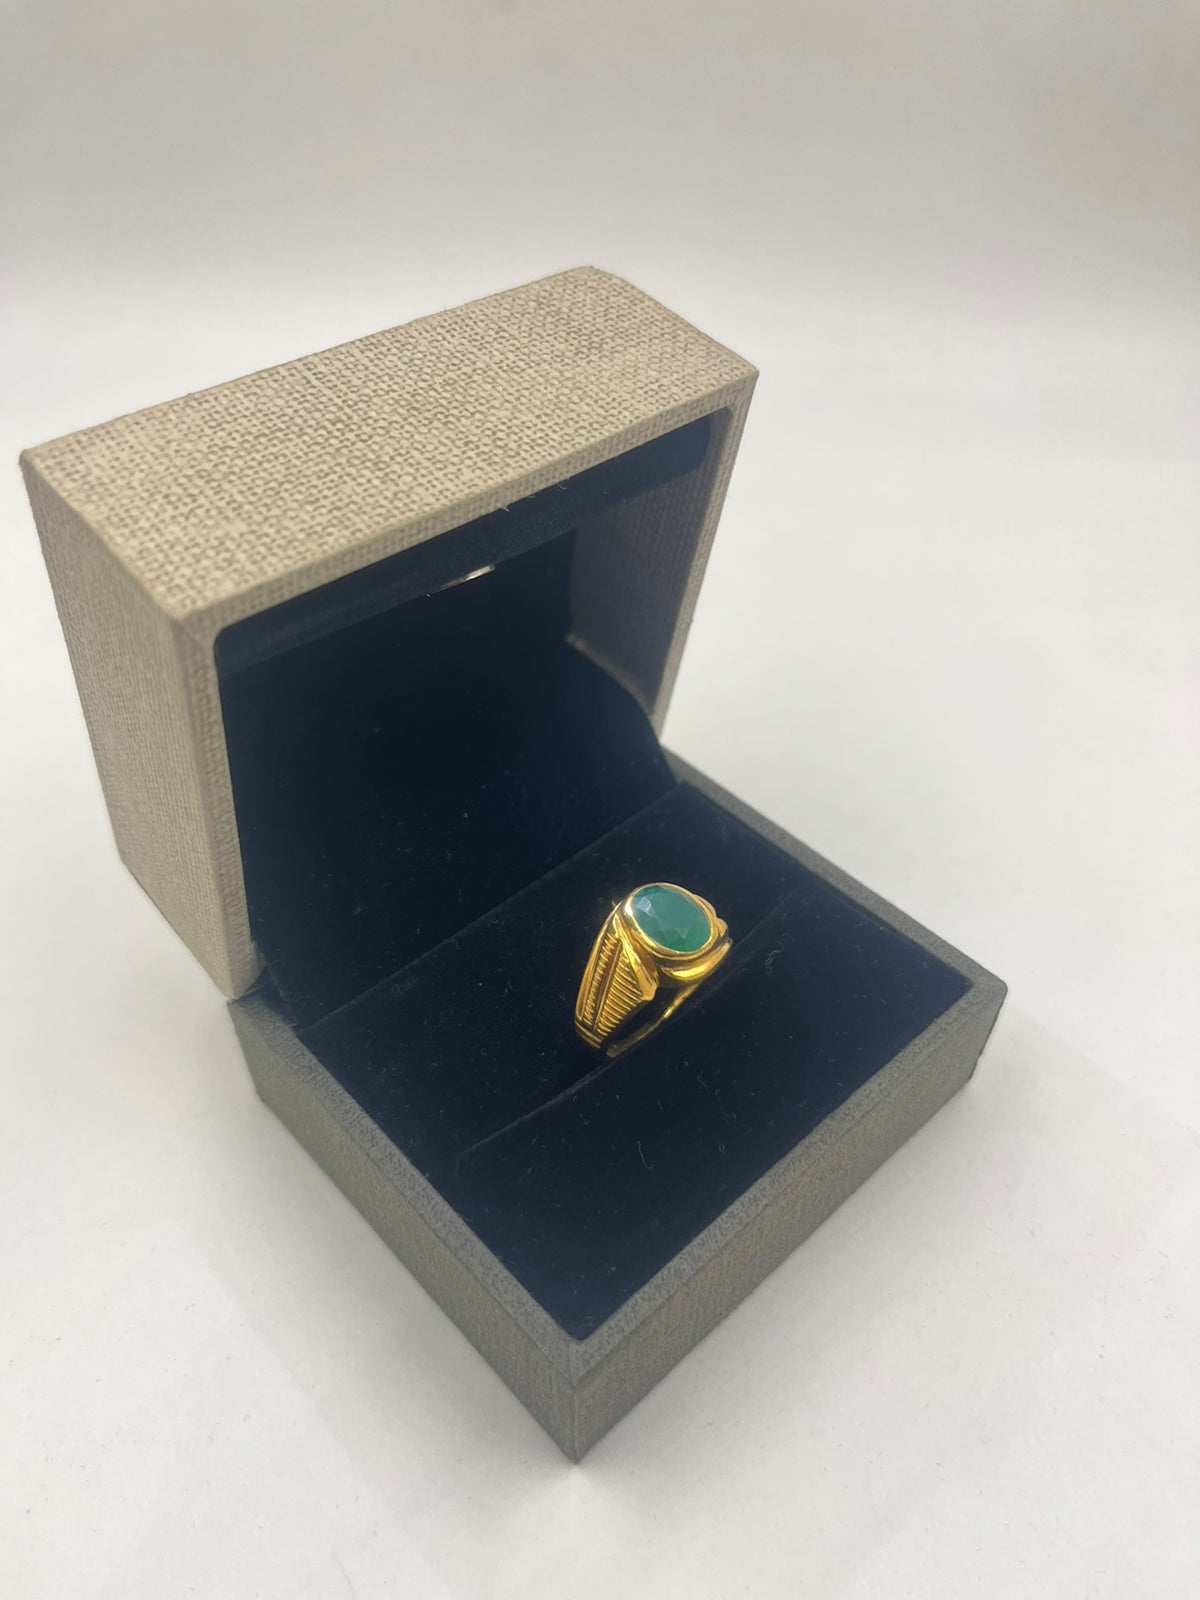 The Panna Fancy Gold Ring For Women (916) Emerald – Welcome to Rani Alankar